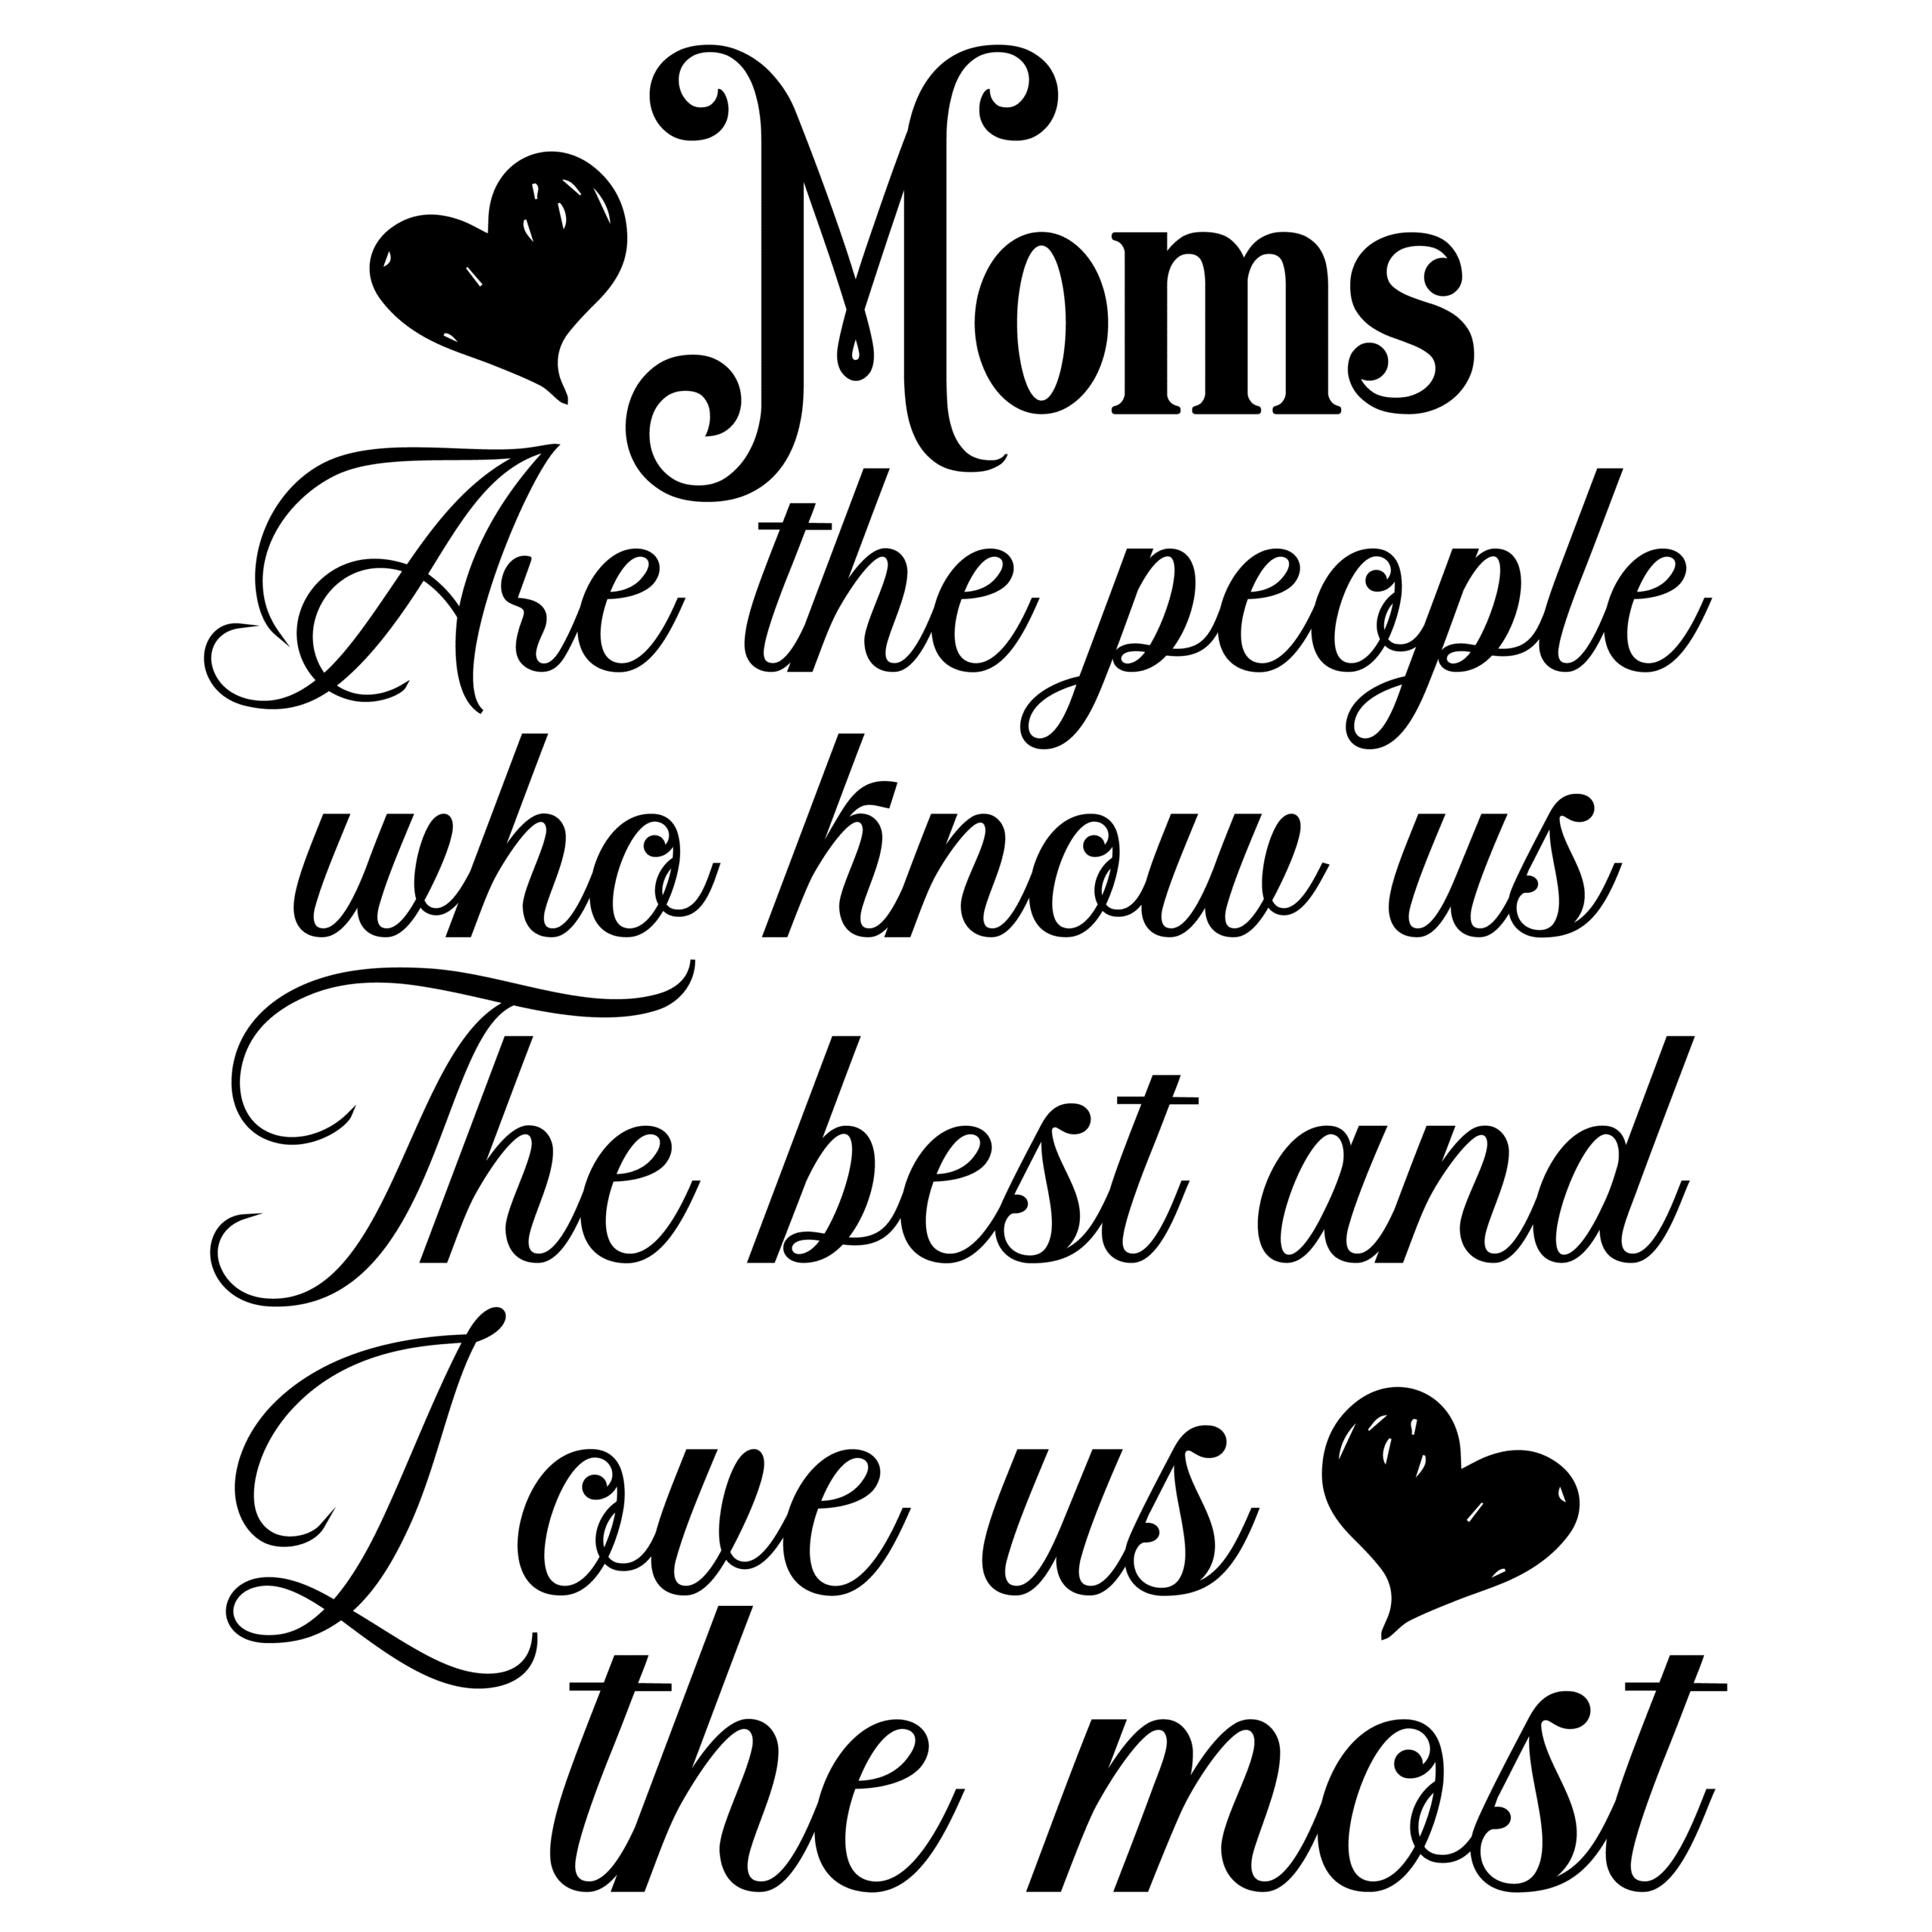 Moms are the people who lnow us the best love us and the most-01